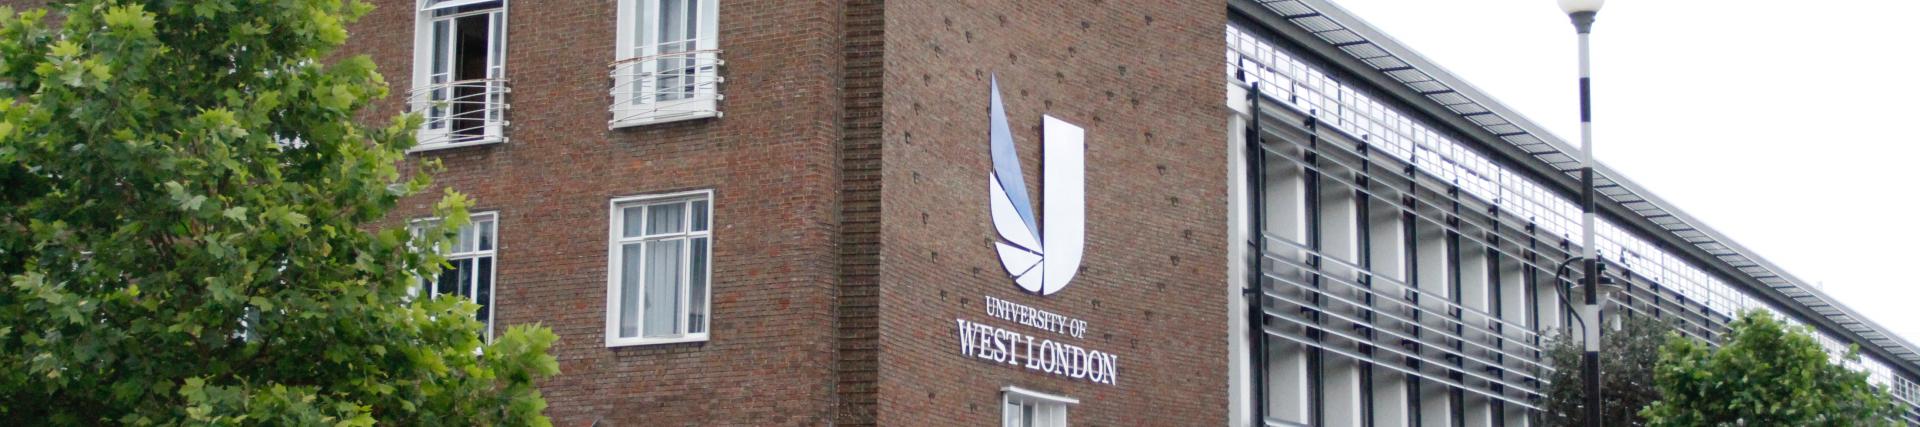 An angled view of the UWL campus building in Ealing